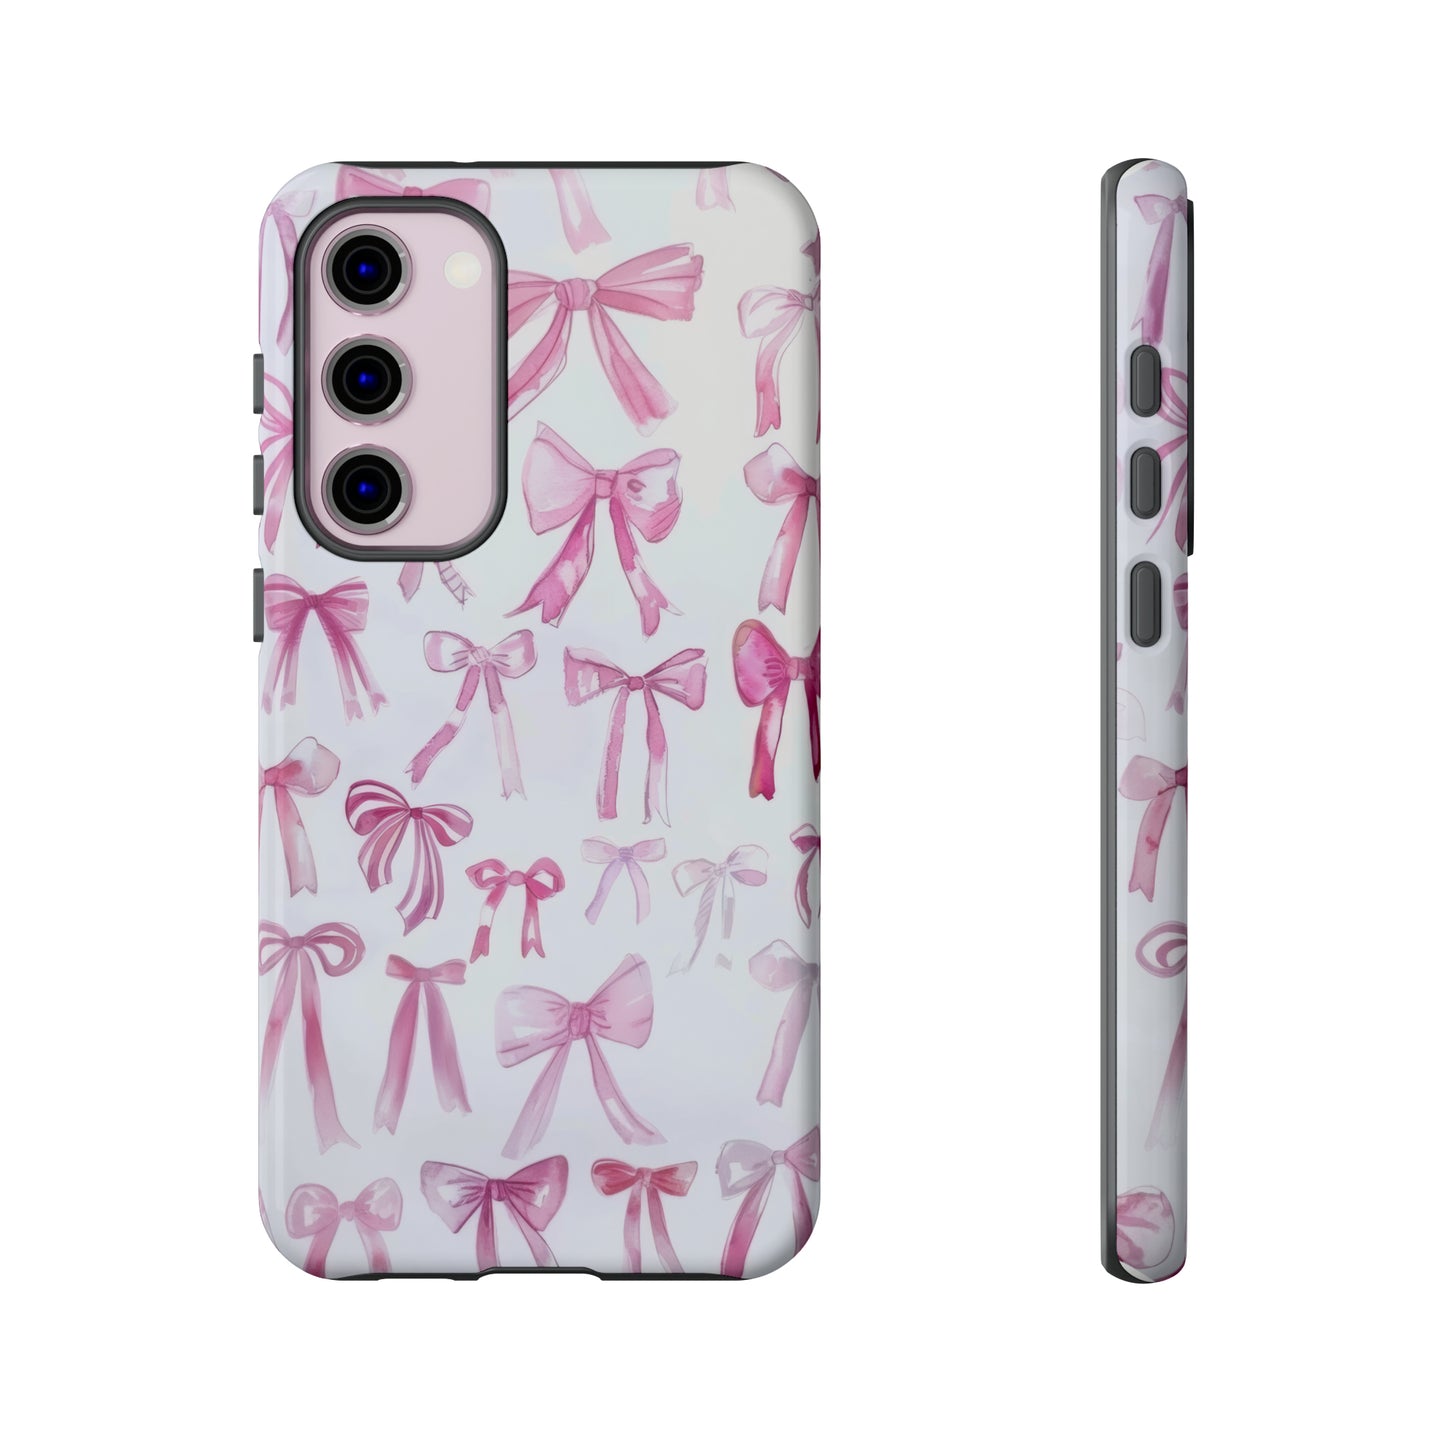 Pretty Pink Bows Phone Case, Feminine Ribbon Design Cover for Smartphones, Charming Accessory, Tough Phone Cases